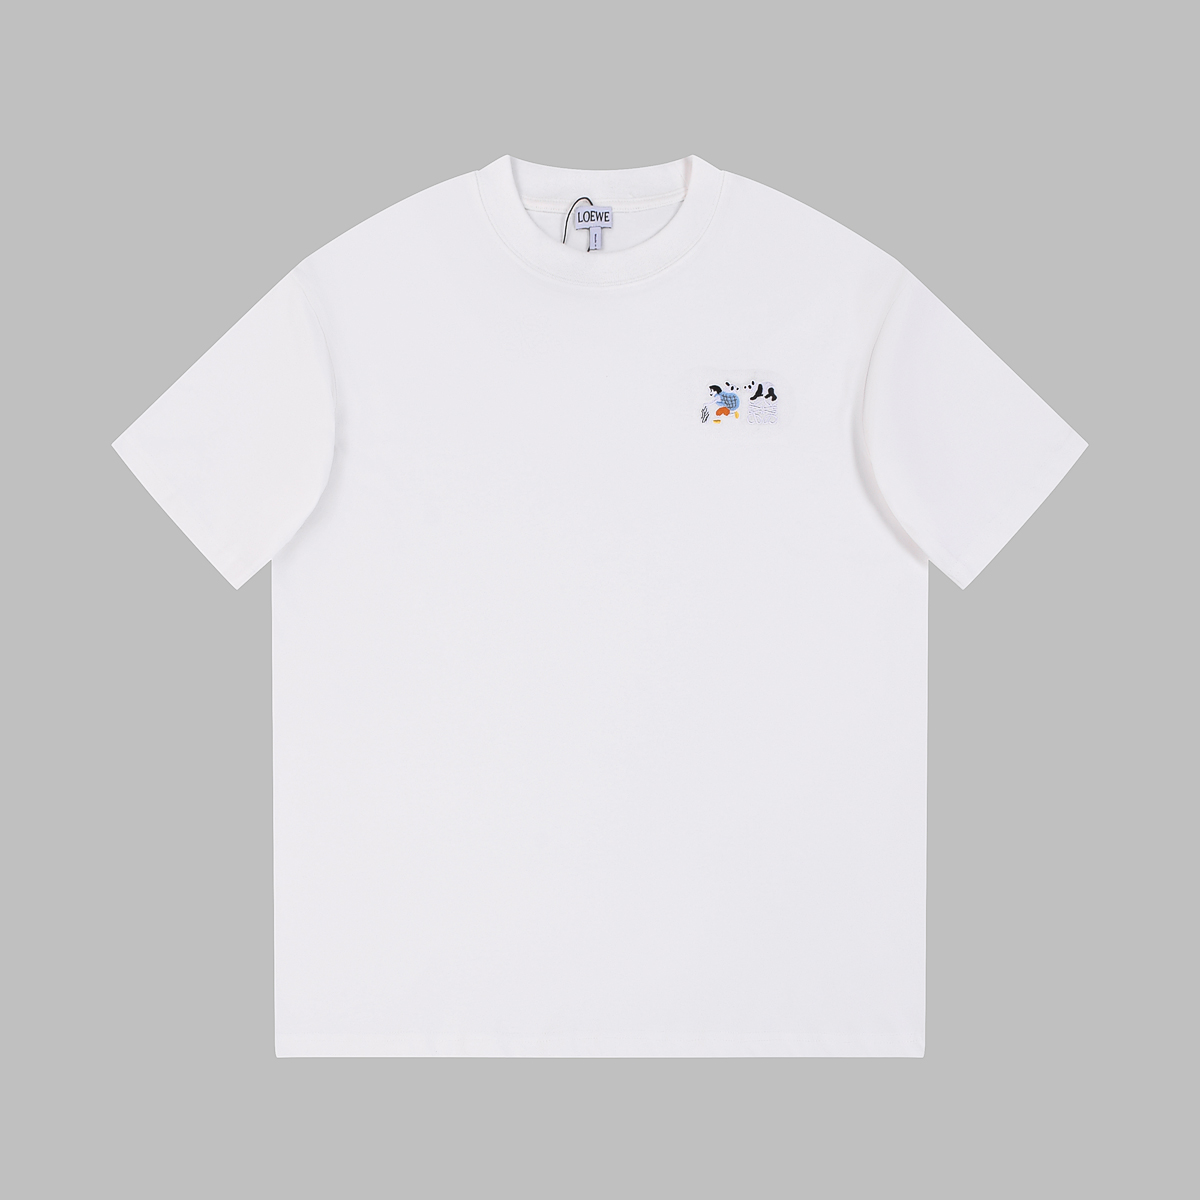 Loewe Clothing T-Shirt Apricot Color Black Blue White Embroidery Unisex Cotton Spring/Summer Collection Fashion Short Sleeve